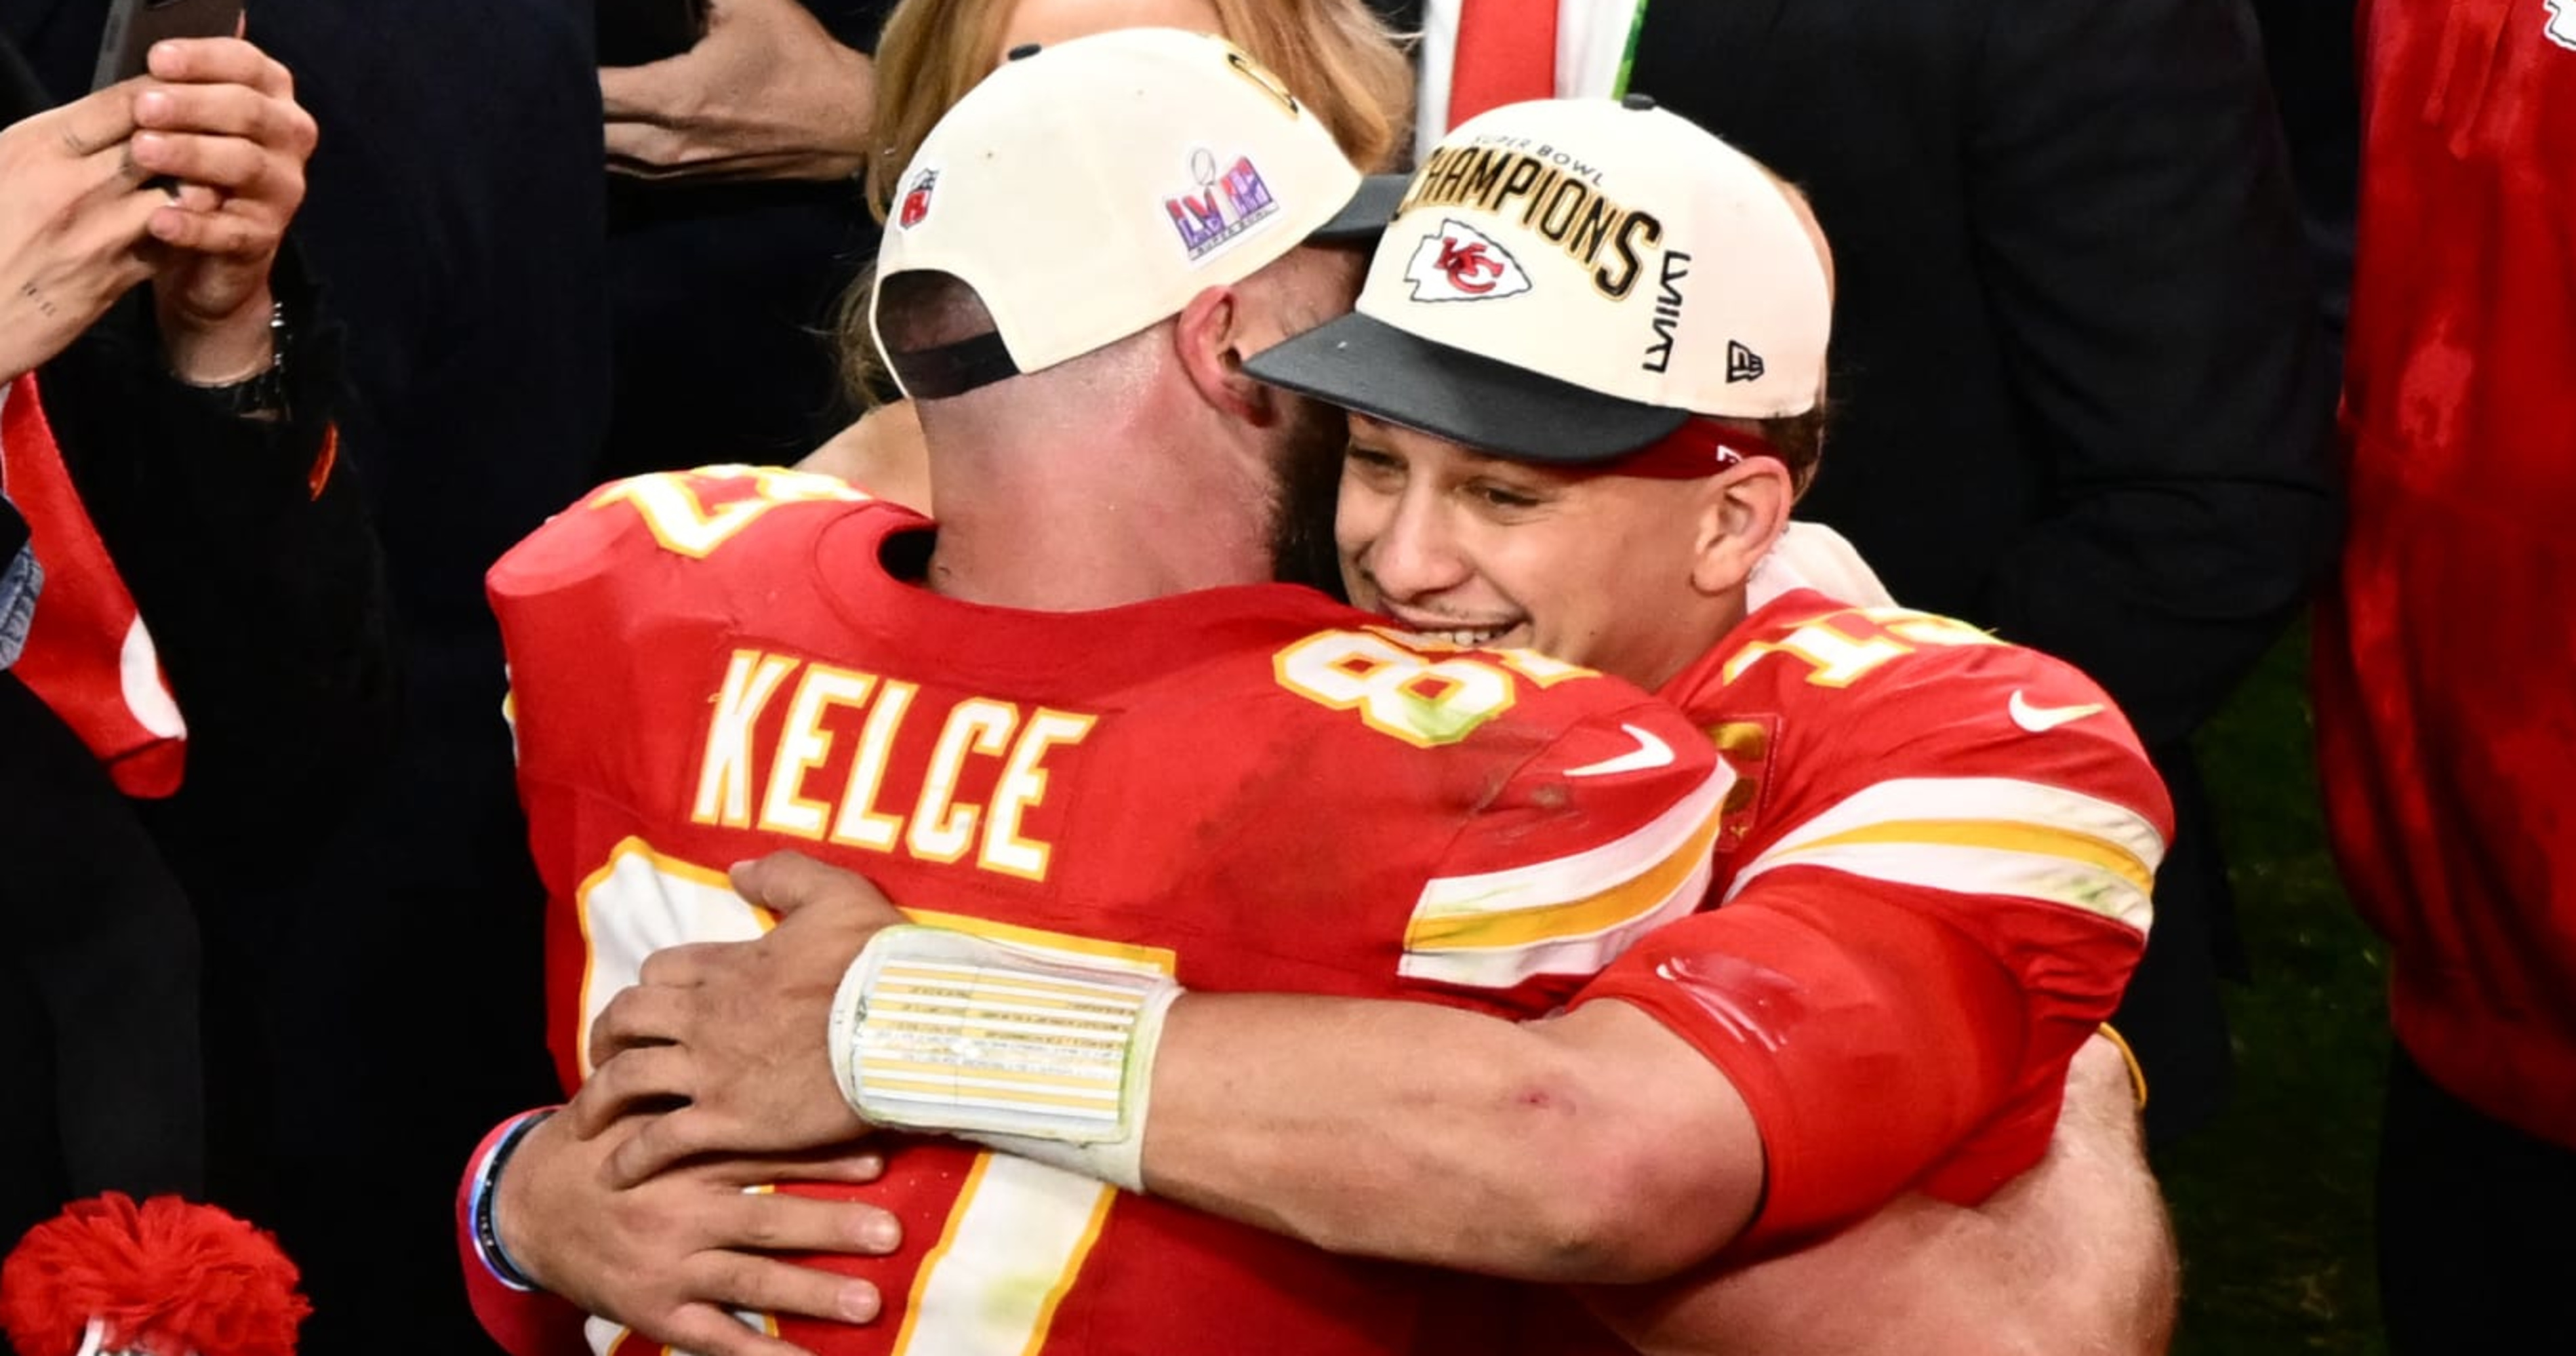 Photo: Typo Found on Chiefs' Super Bowl 58 Ring After Ceremony with Mahomes, Kelce